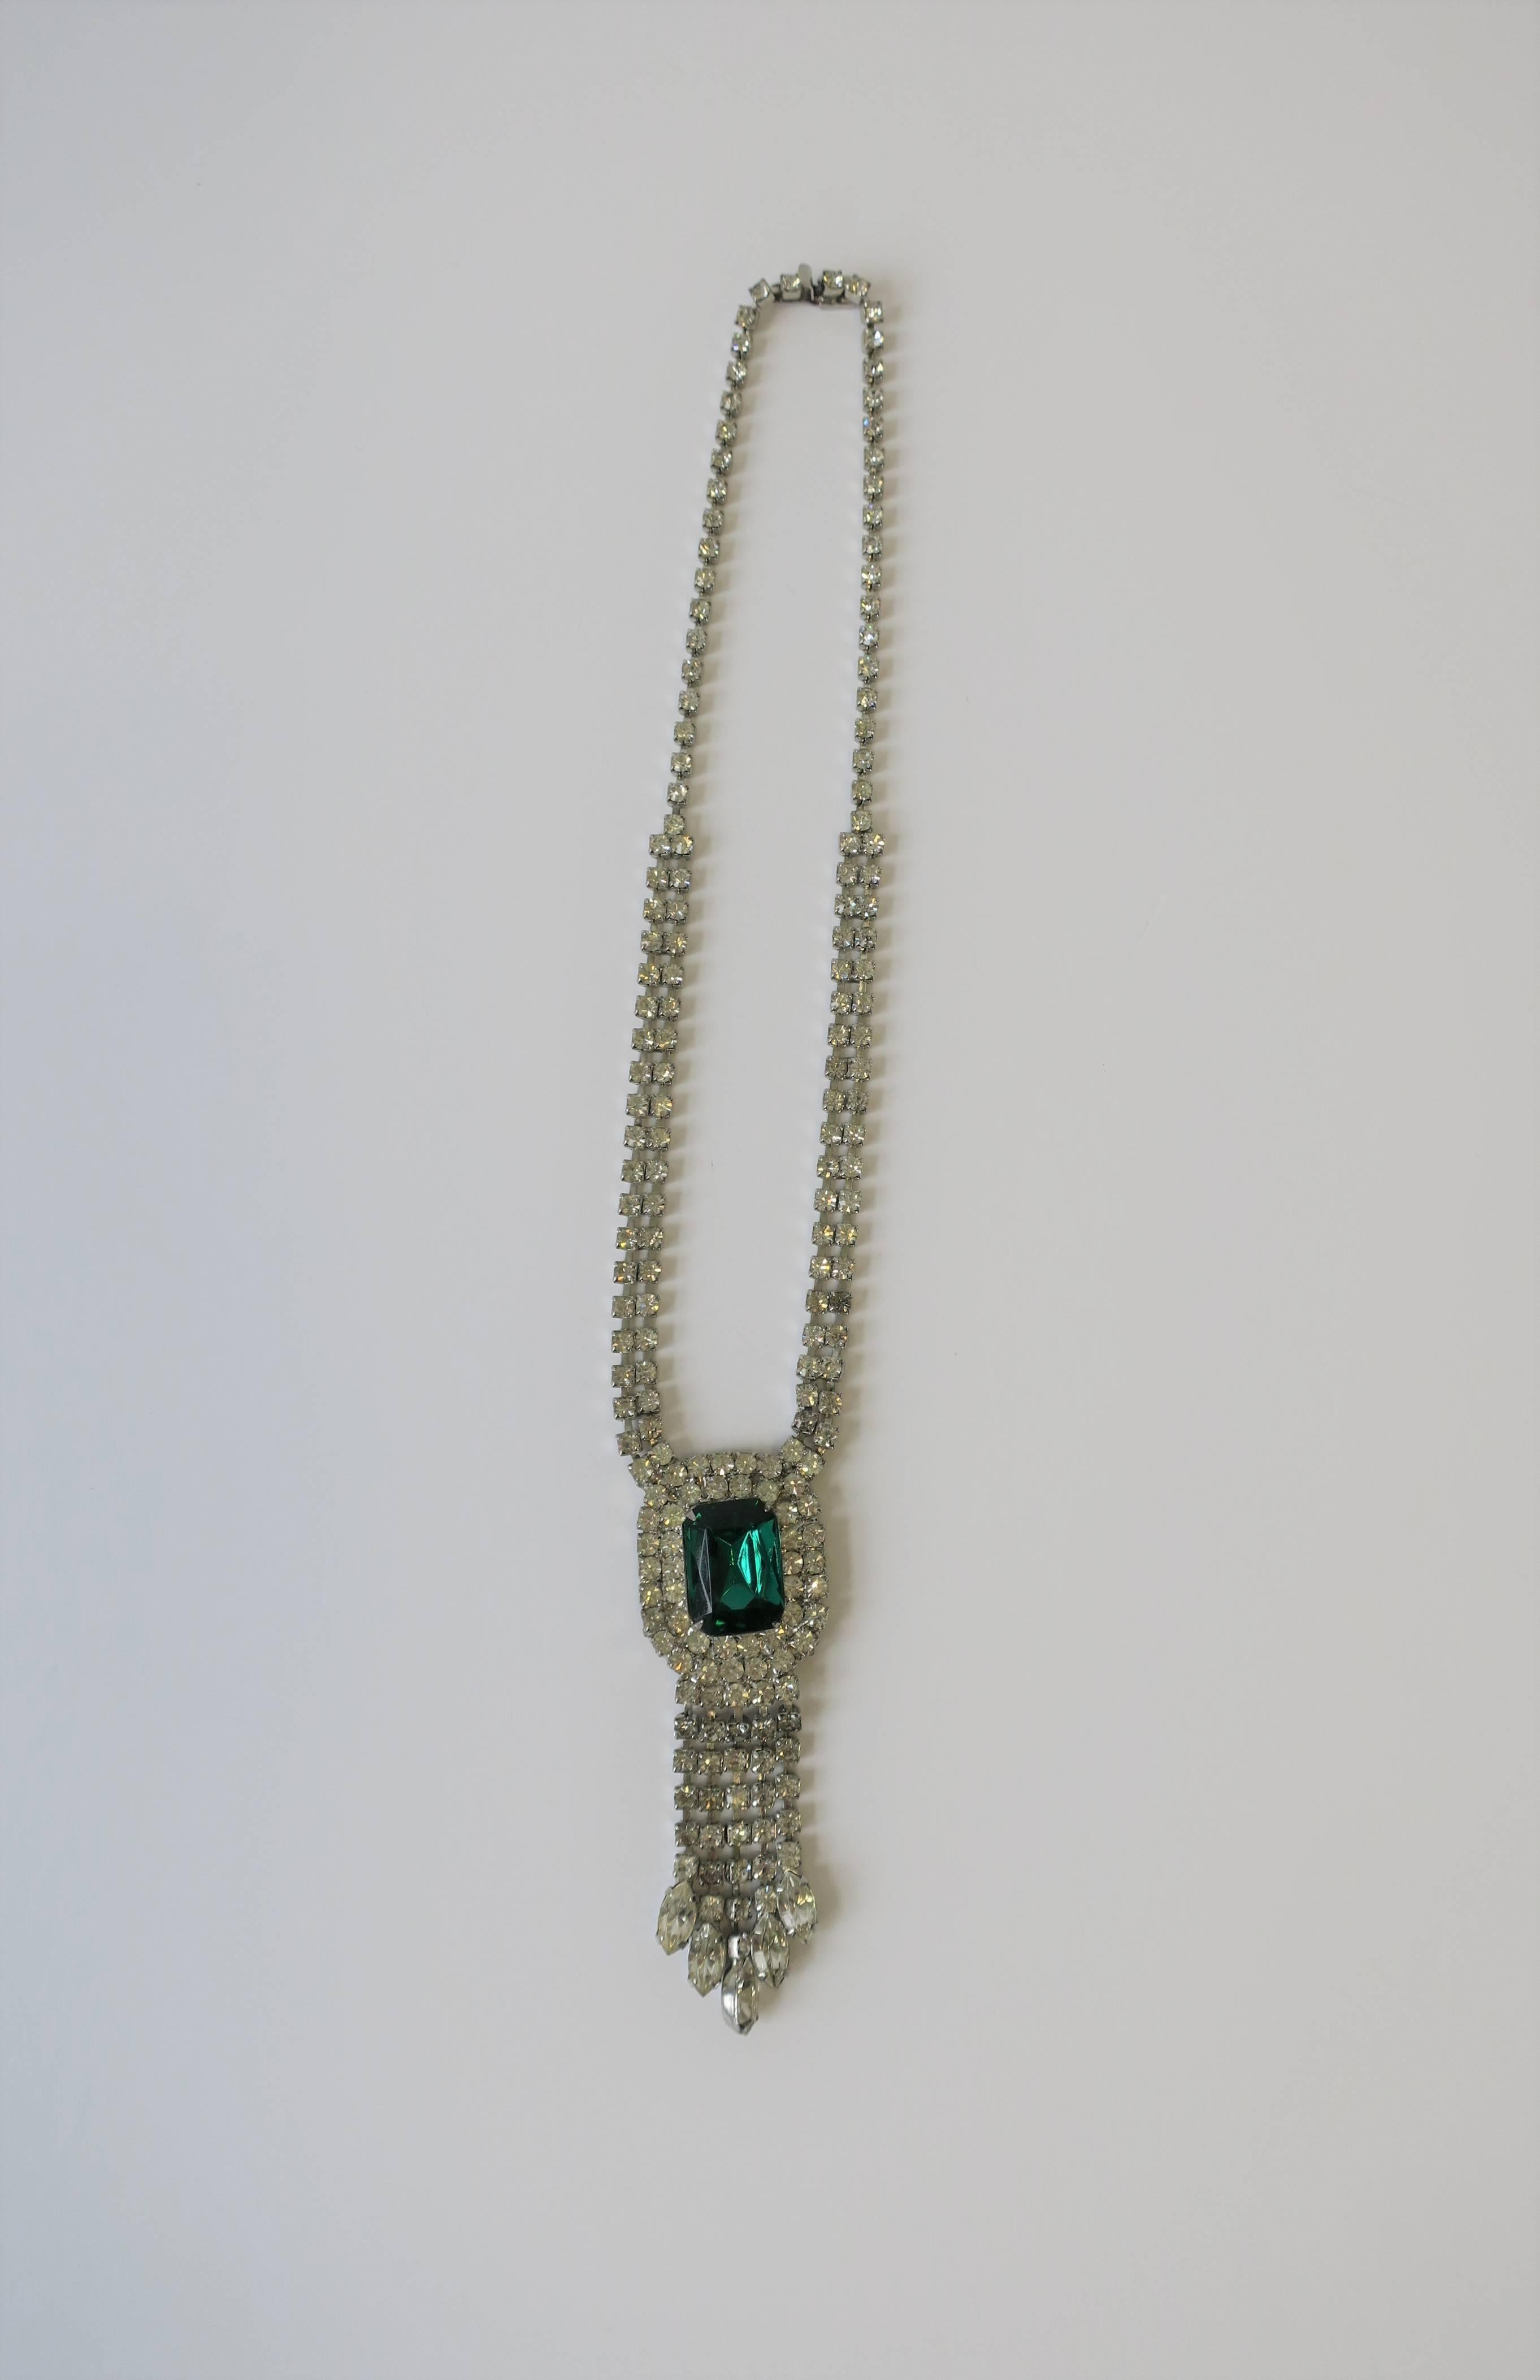 A beautiful vintage green emerald and diamond-esque rhinestone costume jewelry necklace with tassel-like design. Necklace measures, while around neck, 10 inches long, as show in image #3. 

Earrings also available, for more information search